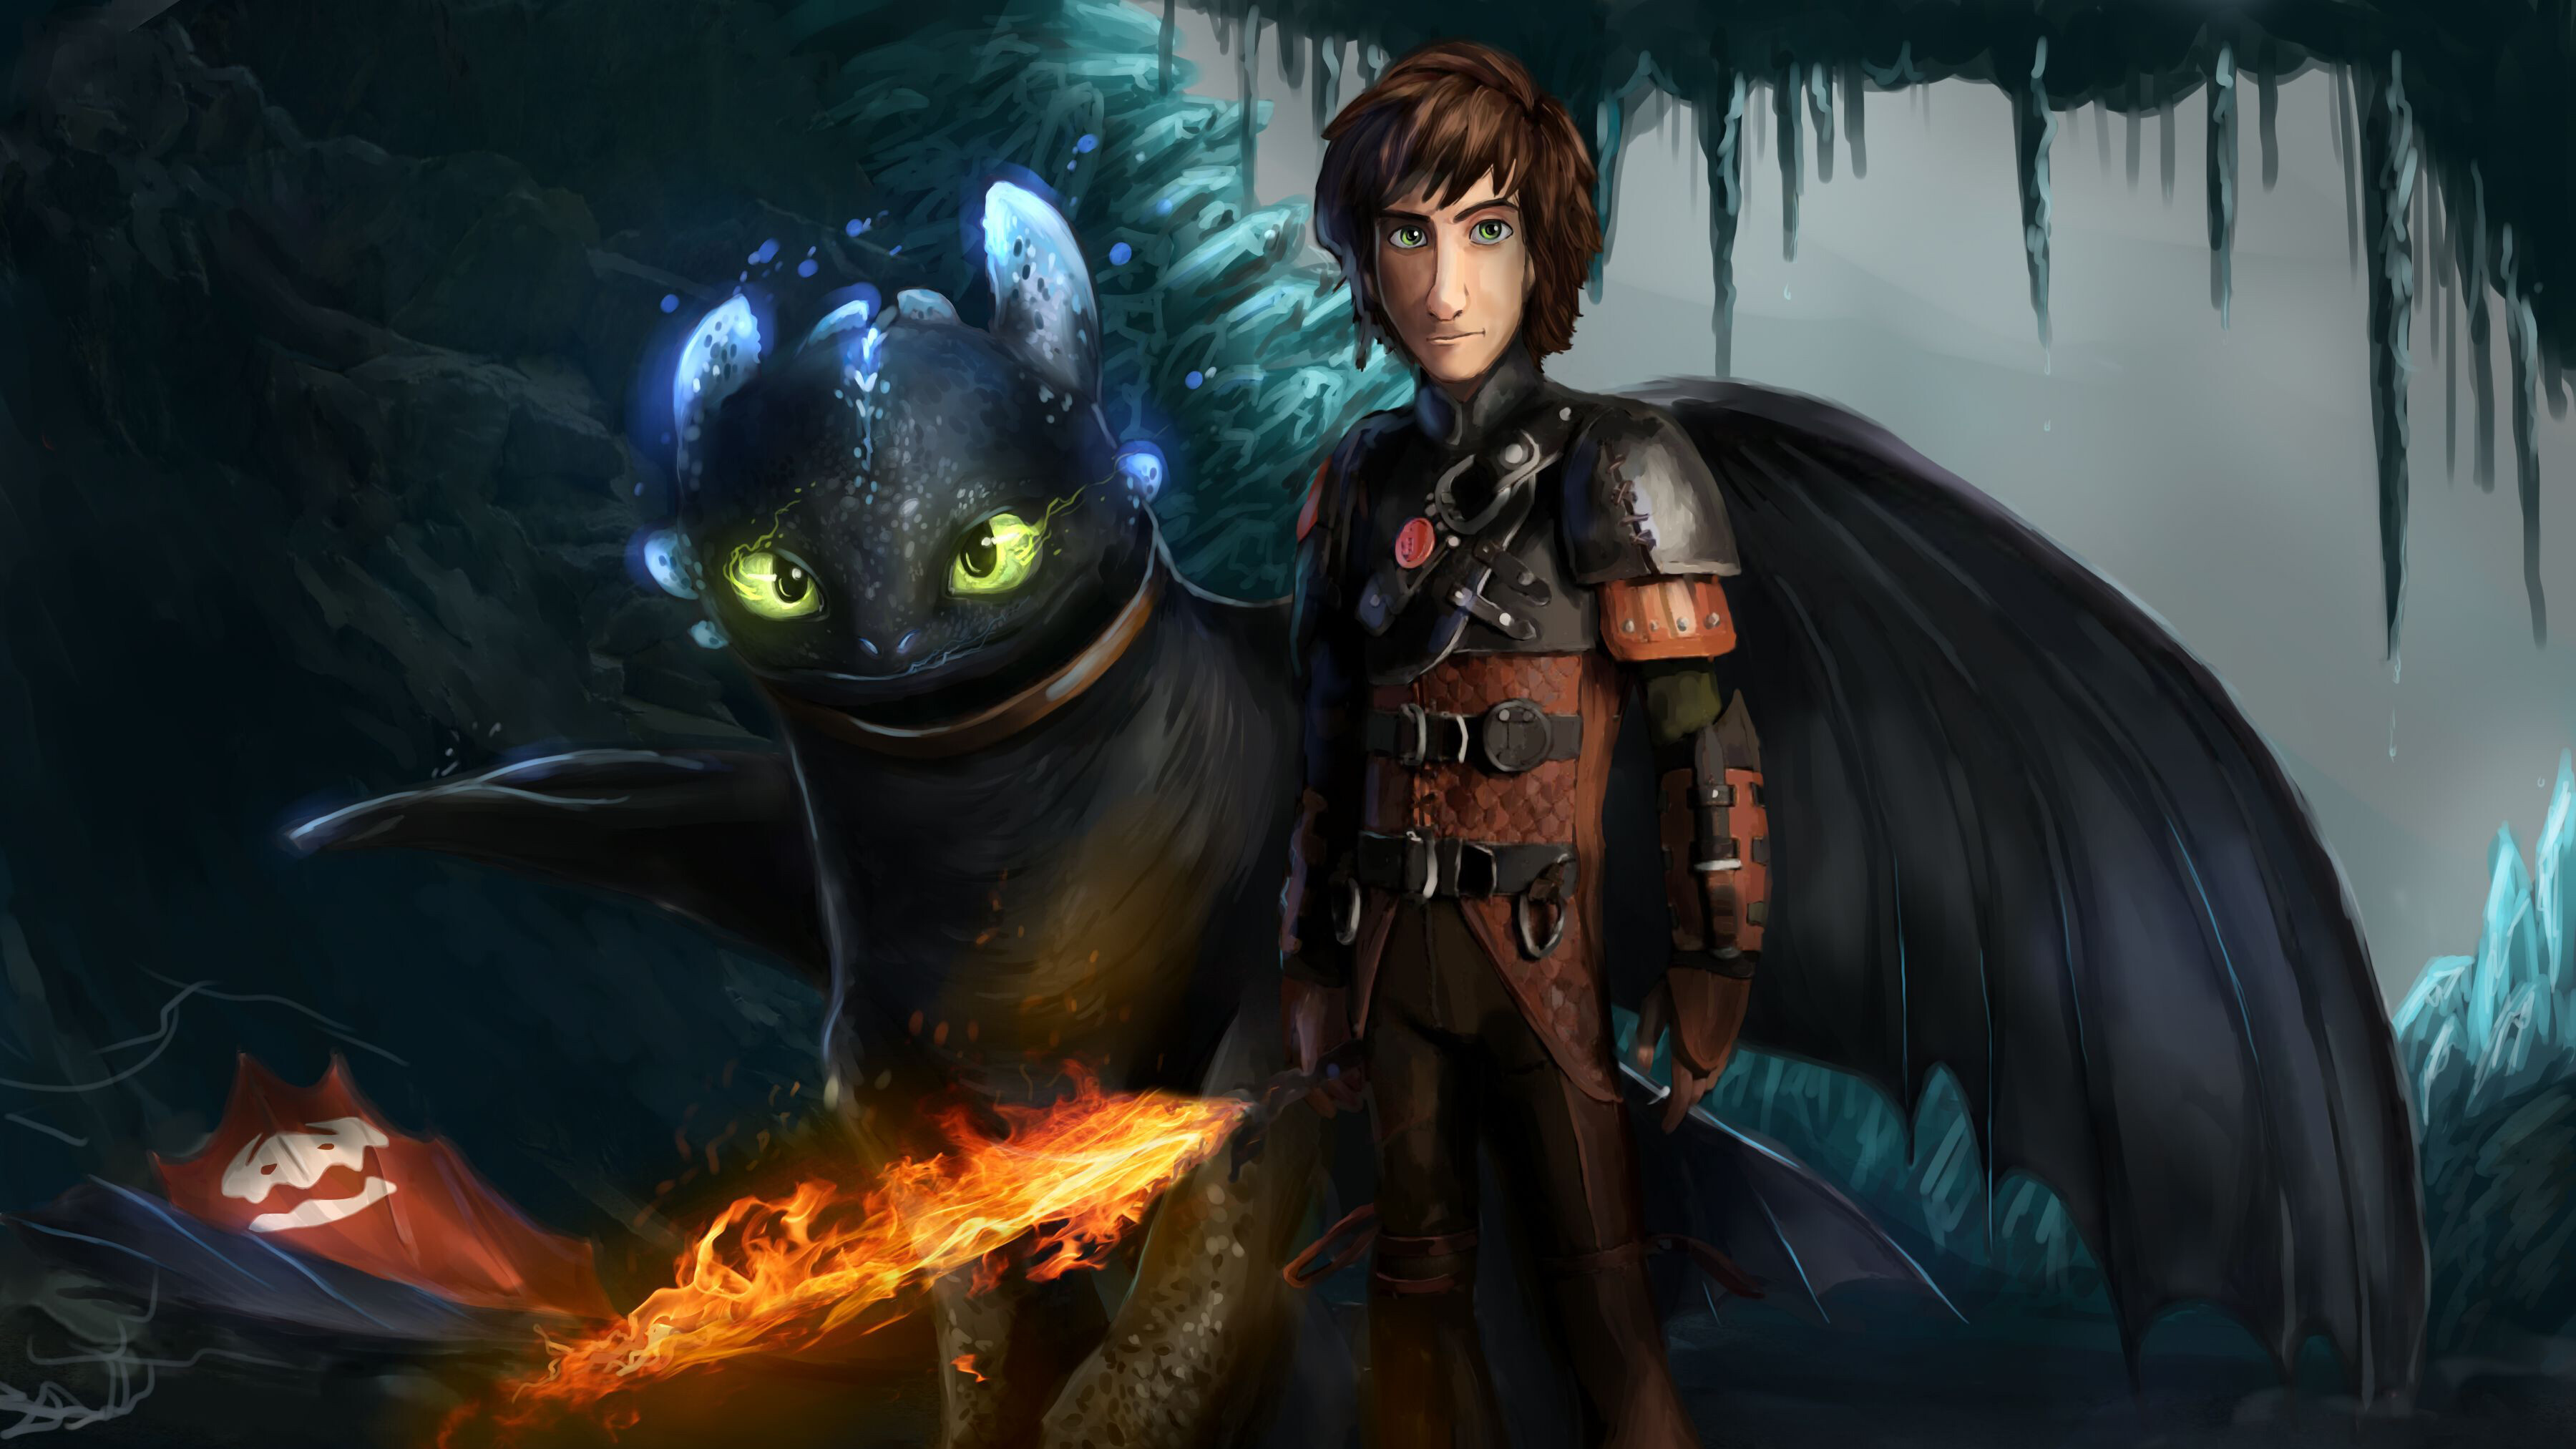 How to Train Your Dragon: Animated story concerning a boy who forms friendship with a dragon named Toothless. 3600x2030 HD Wallpaper.